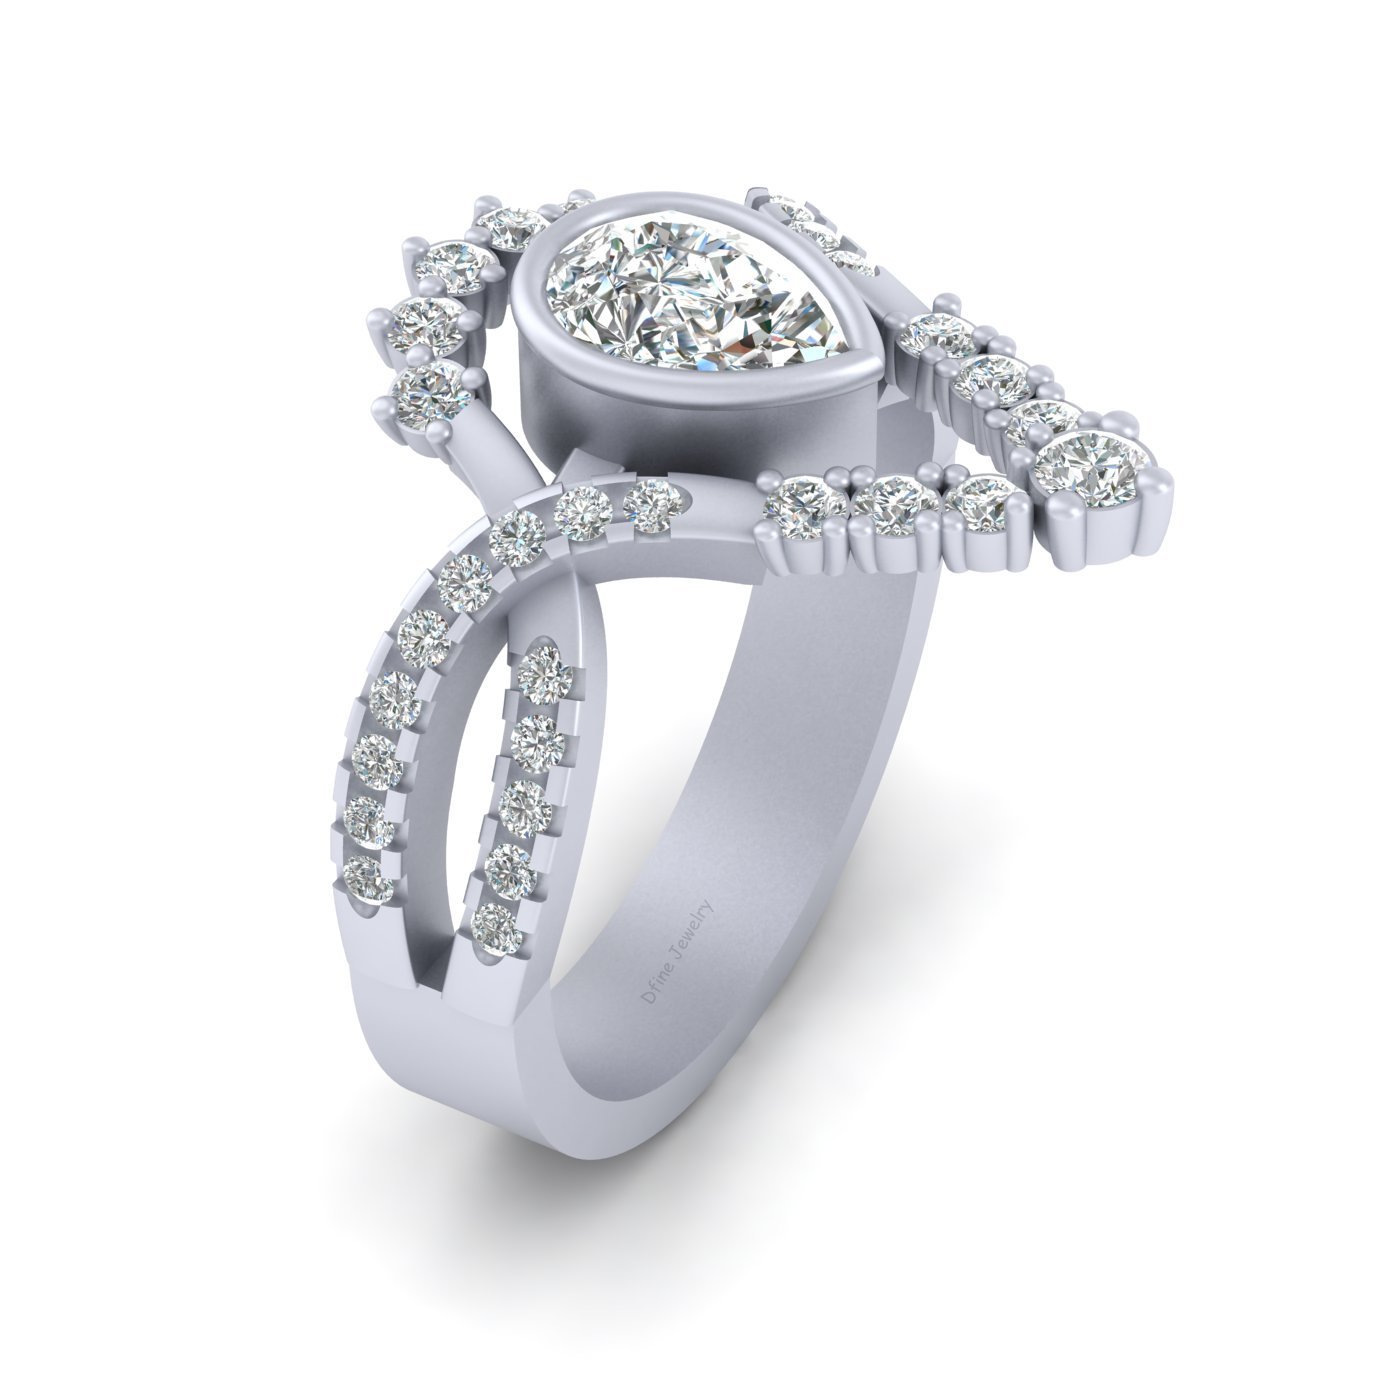 Pear Shaped Diamond Engagement Ring For Women Solid 18k White Gold Wedding Ring - $1,149.99